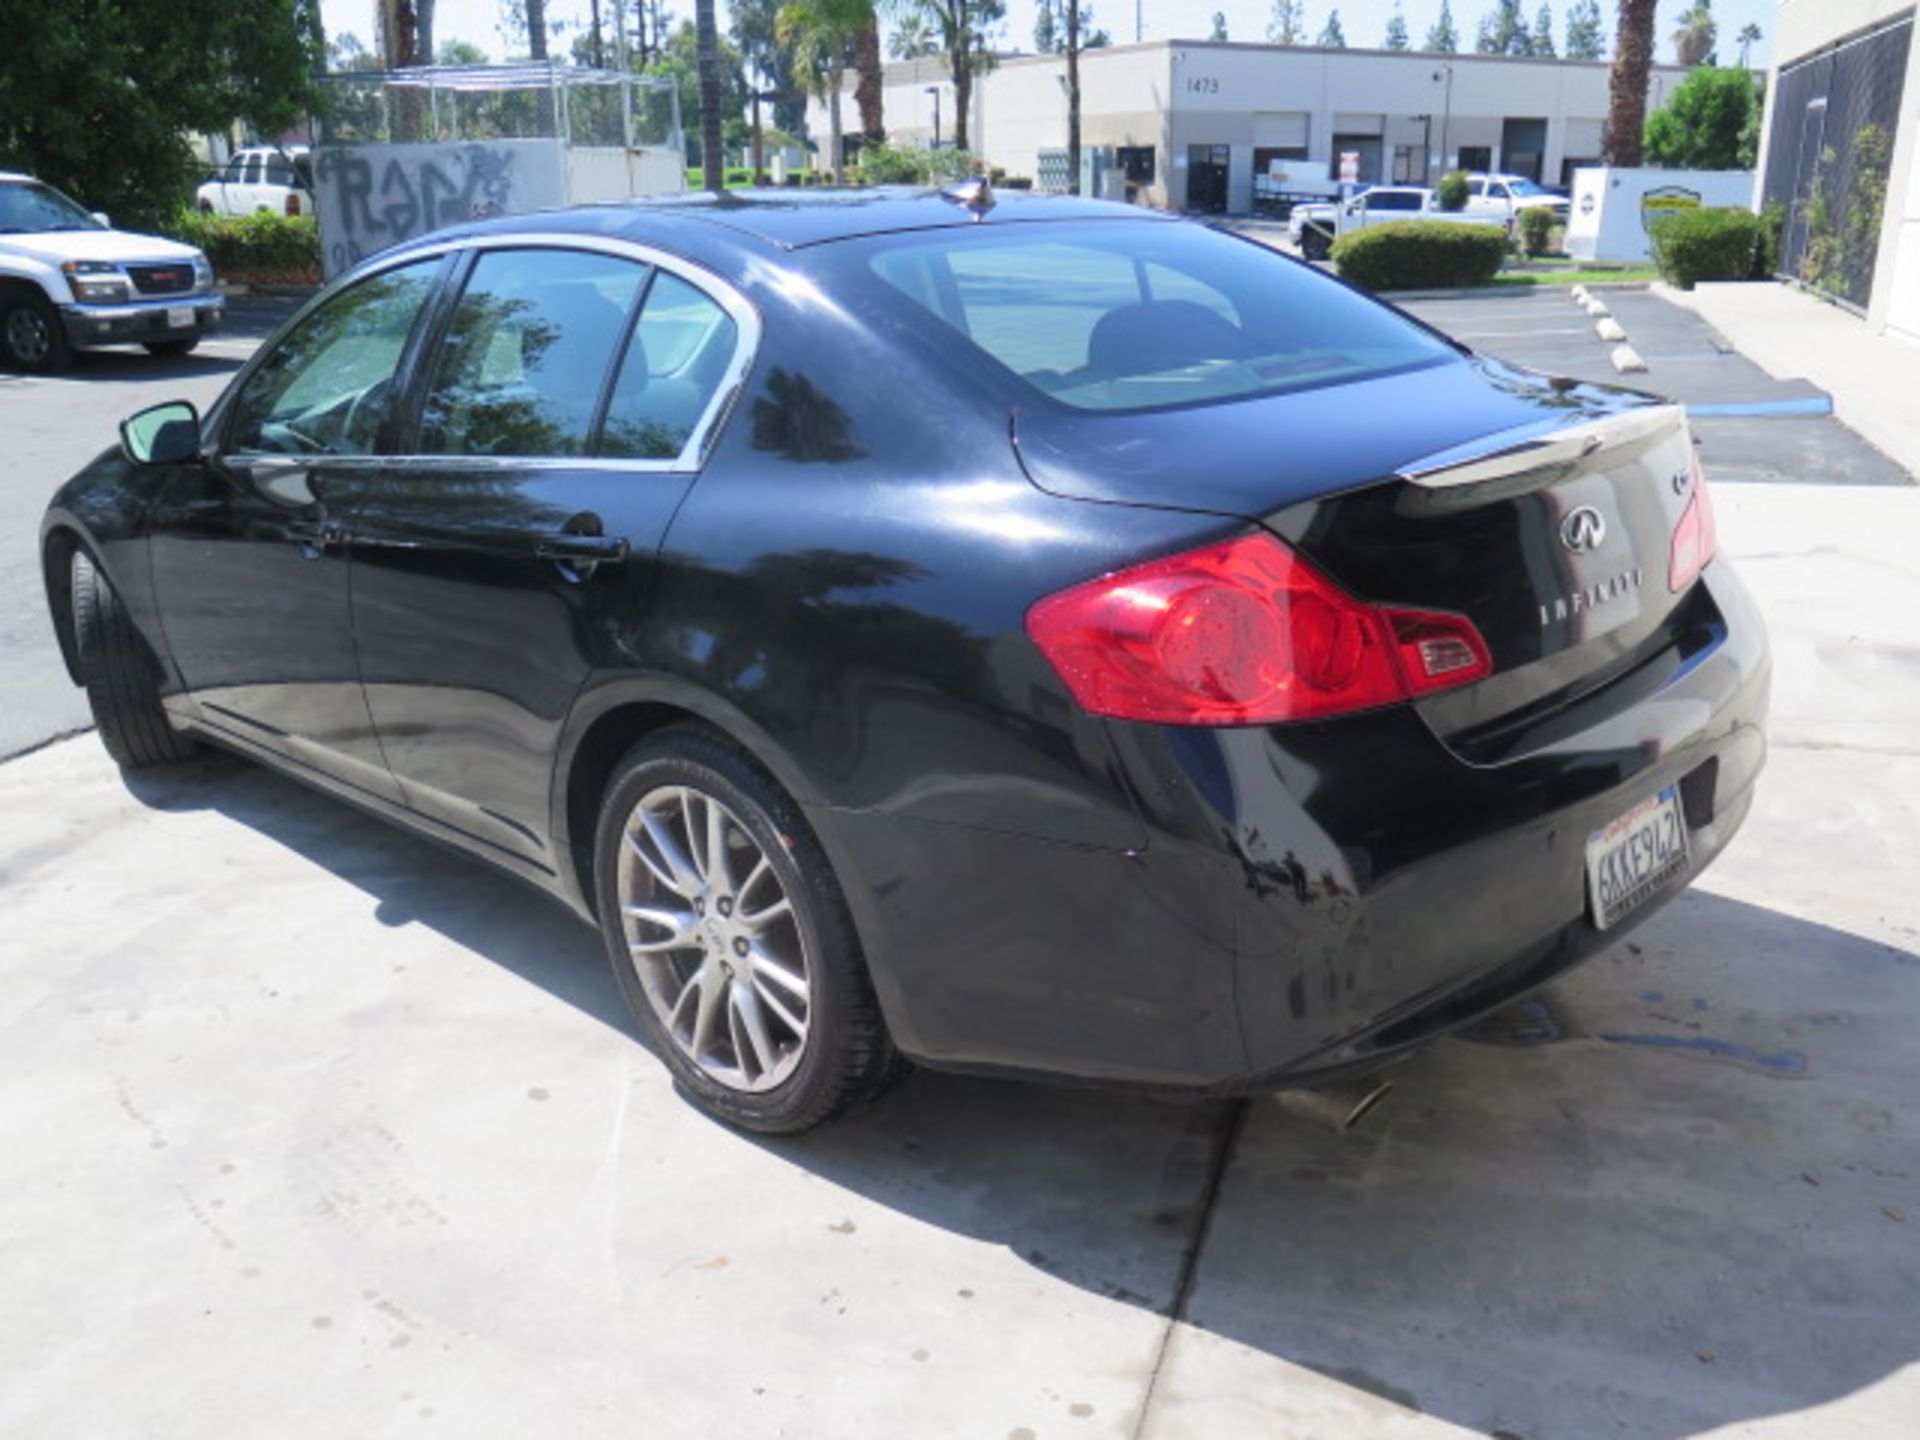 2010 Infinity G37 Lisc# 6KKE924 w/ Rebuilt Gas Engine, Automatic Trans, AC, 133K Miles, SOLD AS IS - Image 6 of 27